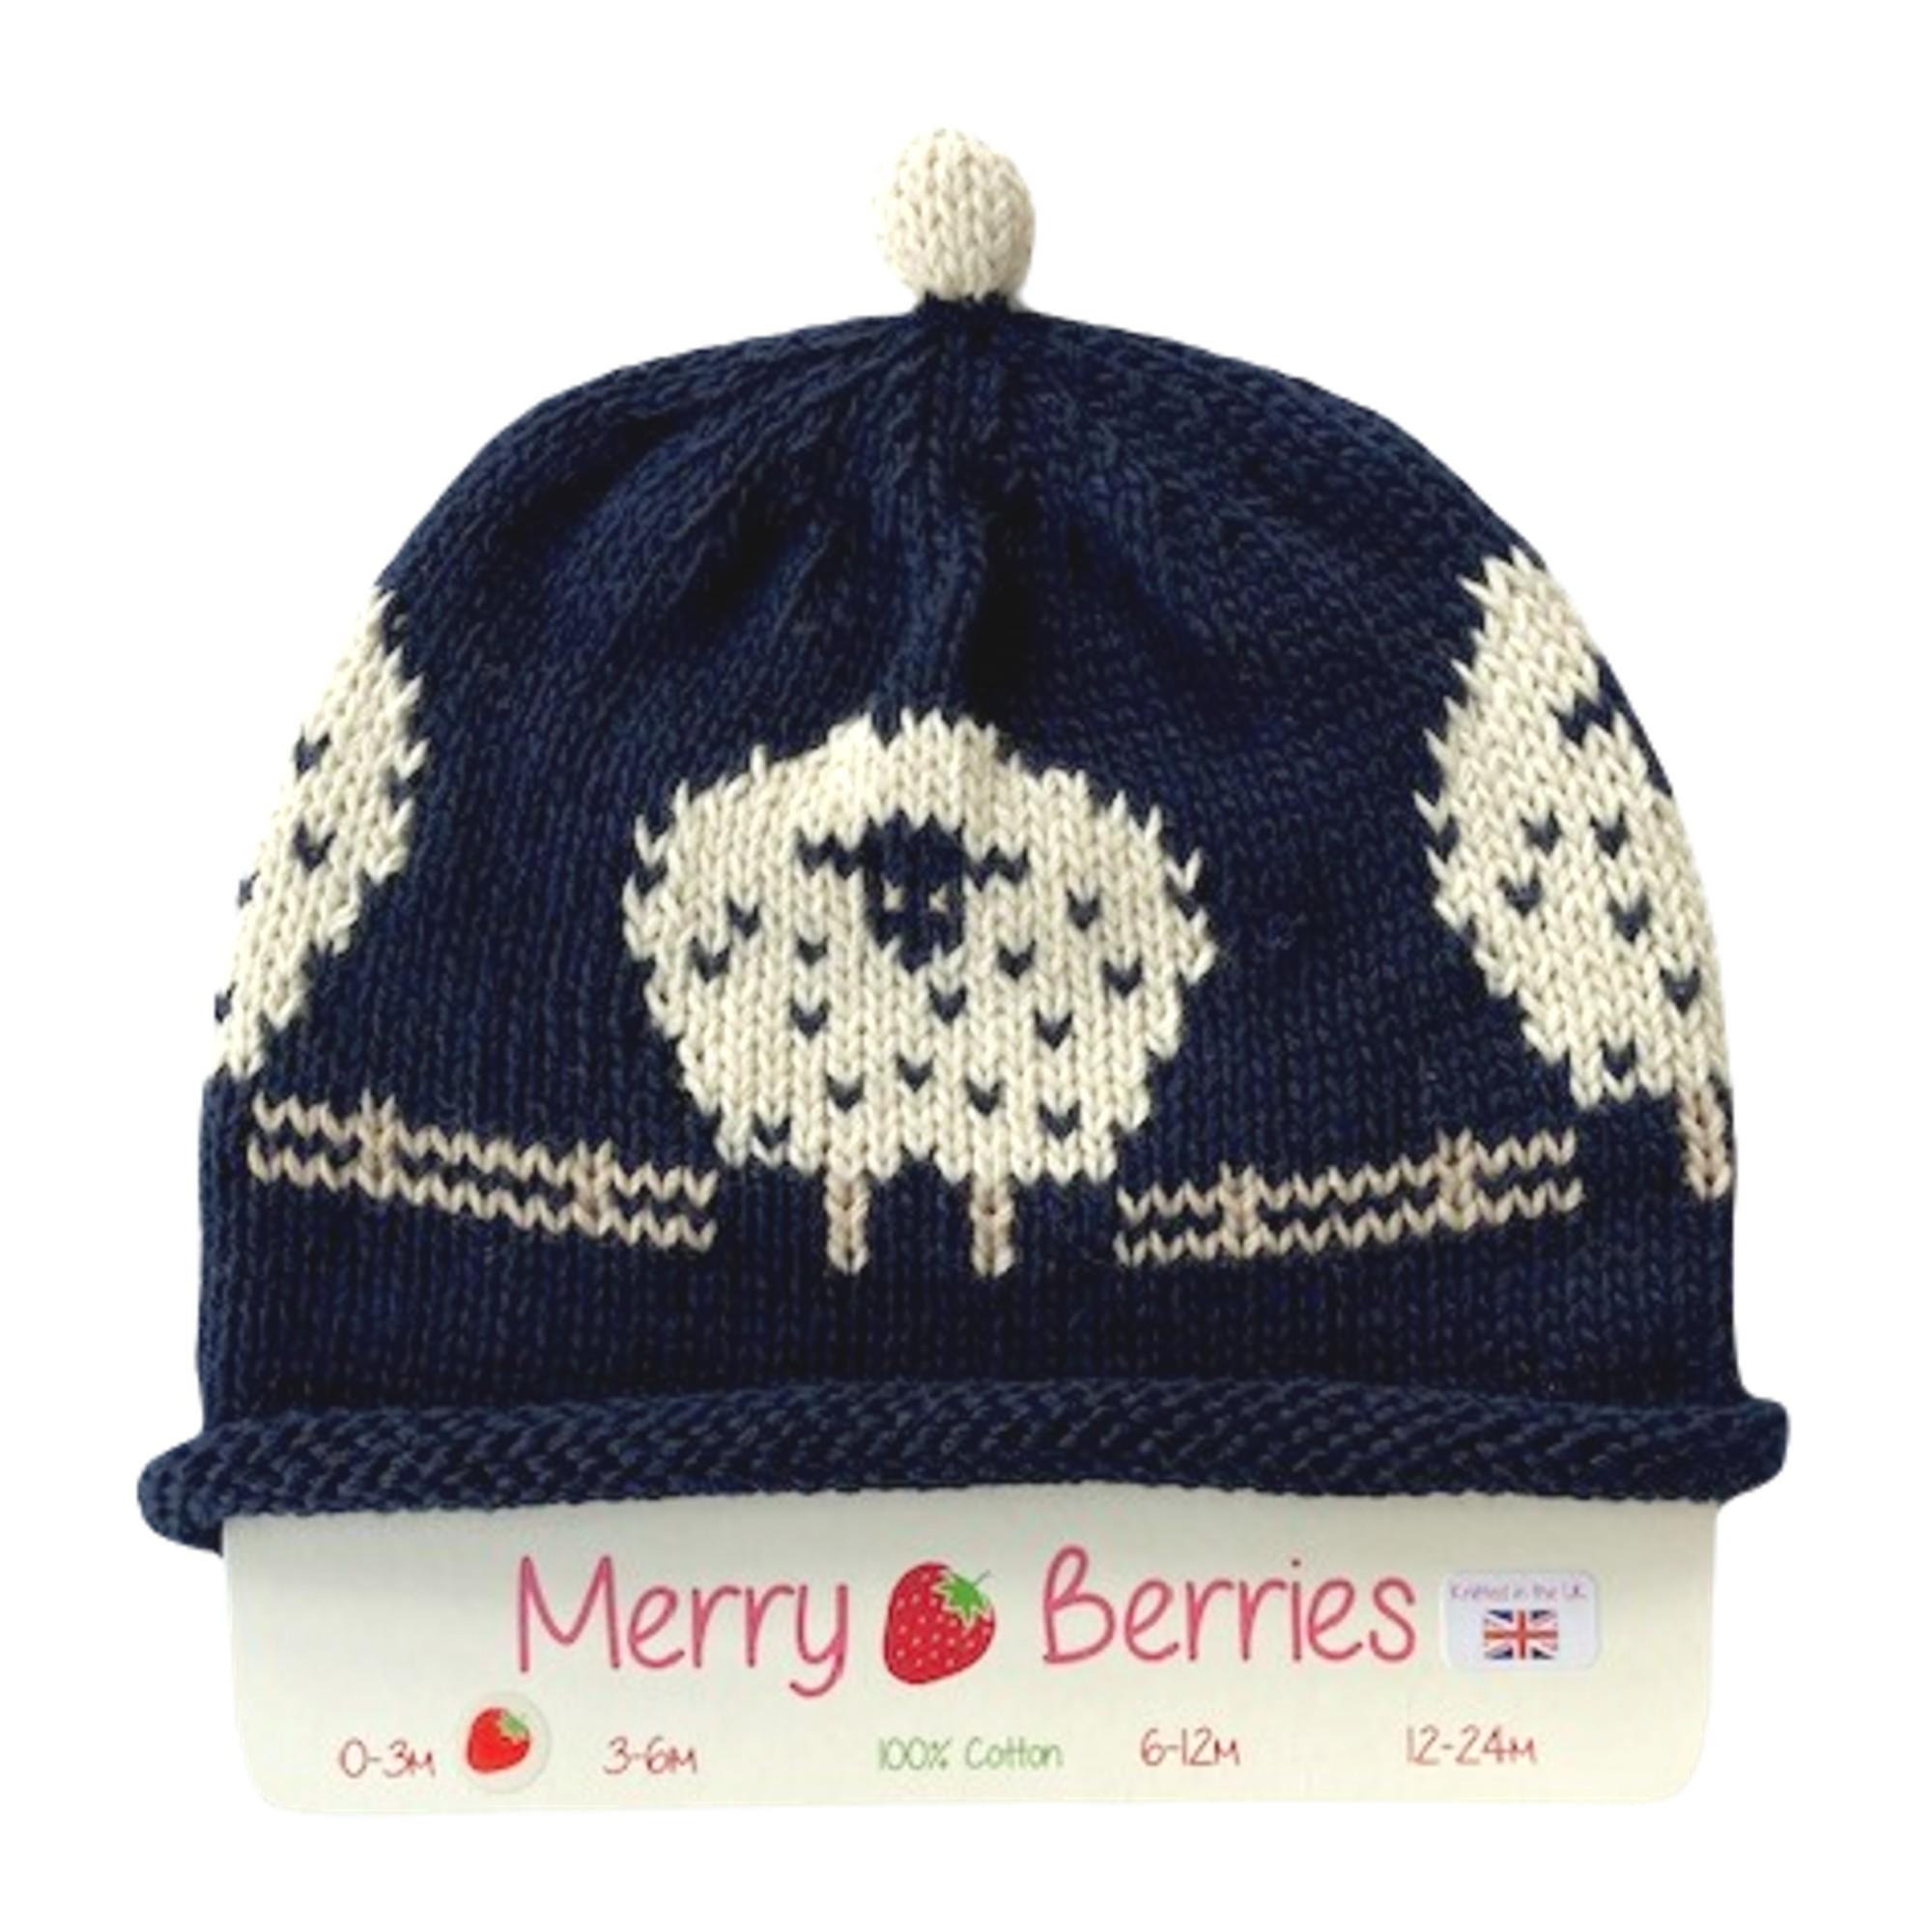 Merry Berries - Navy cream Sheep Knitted baby Hat-0-24mths-Cotton